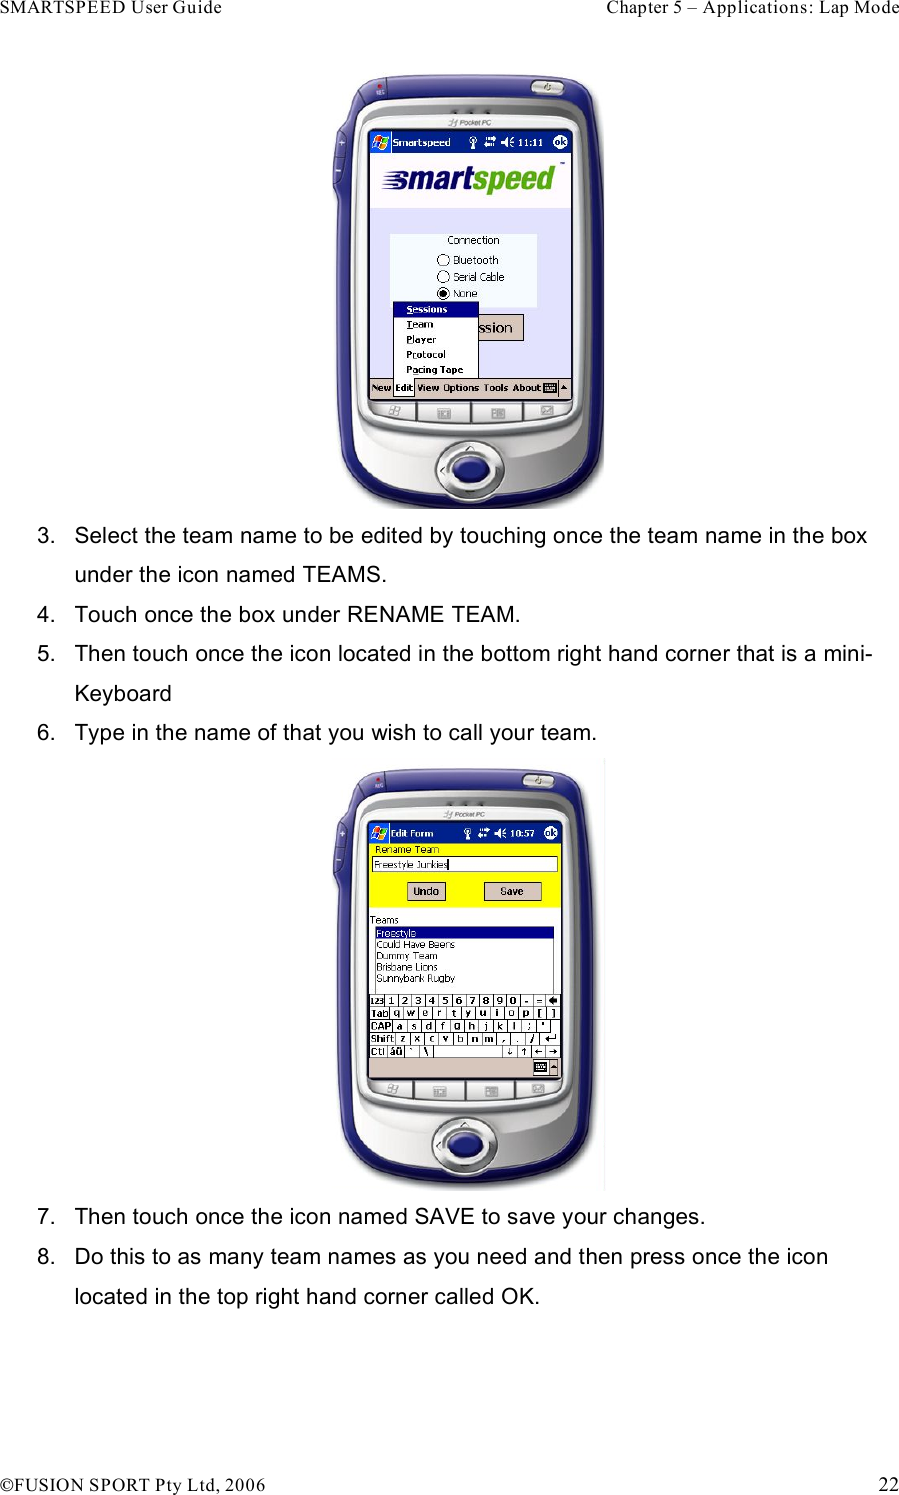 SMARTSPEED User Guide    Chapter 5 – Applications: Lap Mode !FUSION SPORT Pty Ltd, 2006    22  3.  Select the team name to be edited by touching once the team name in the box under the icon named TEAMS. 4.  Touch once the box under RENAME TEAM. 5.  Then touch once the icon located in the bottom right hand corner that is a mini-Keyboard 6.  Type in the name of that you wish to call your team.  7.  Then touch once the icon named SAVE to save your changes. 8.  Do this to as many team names as you need and then press once the icon located in the top right hand corner called OK.  